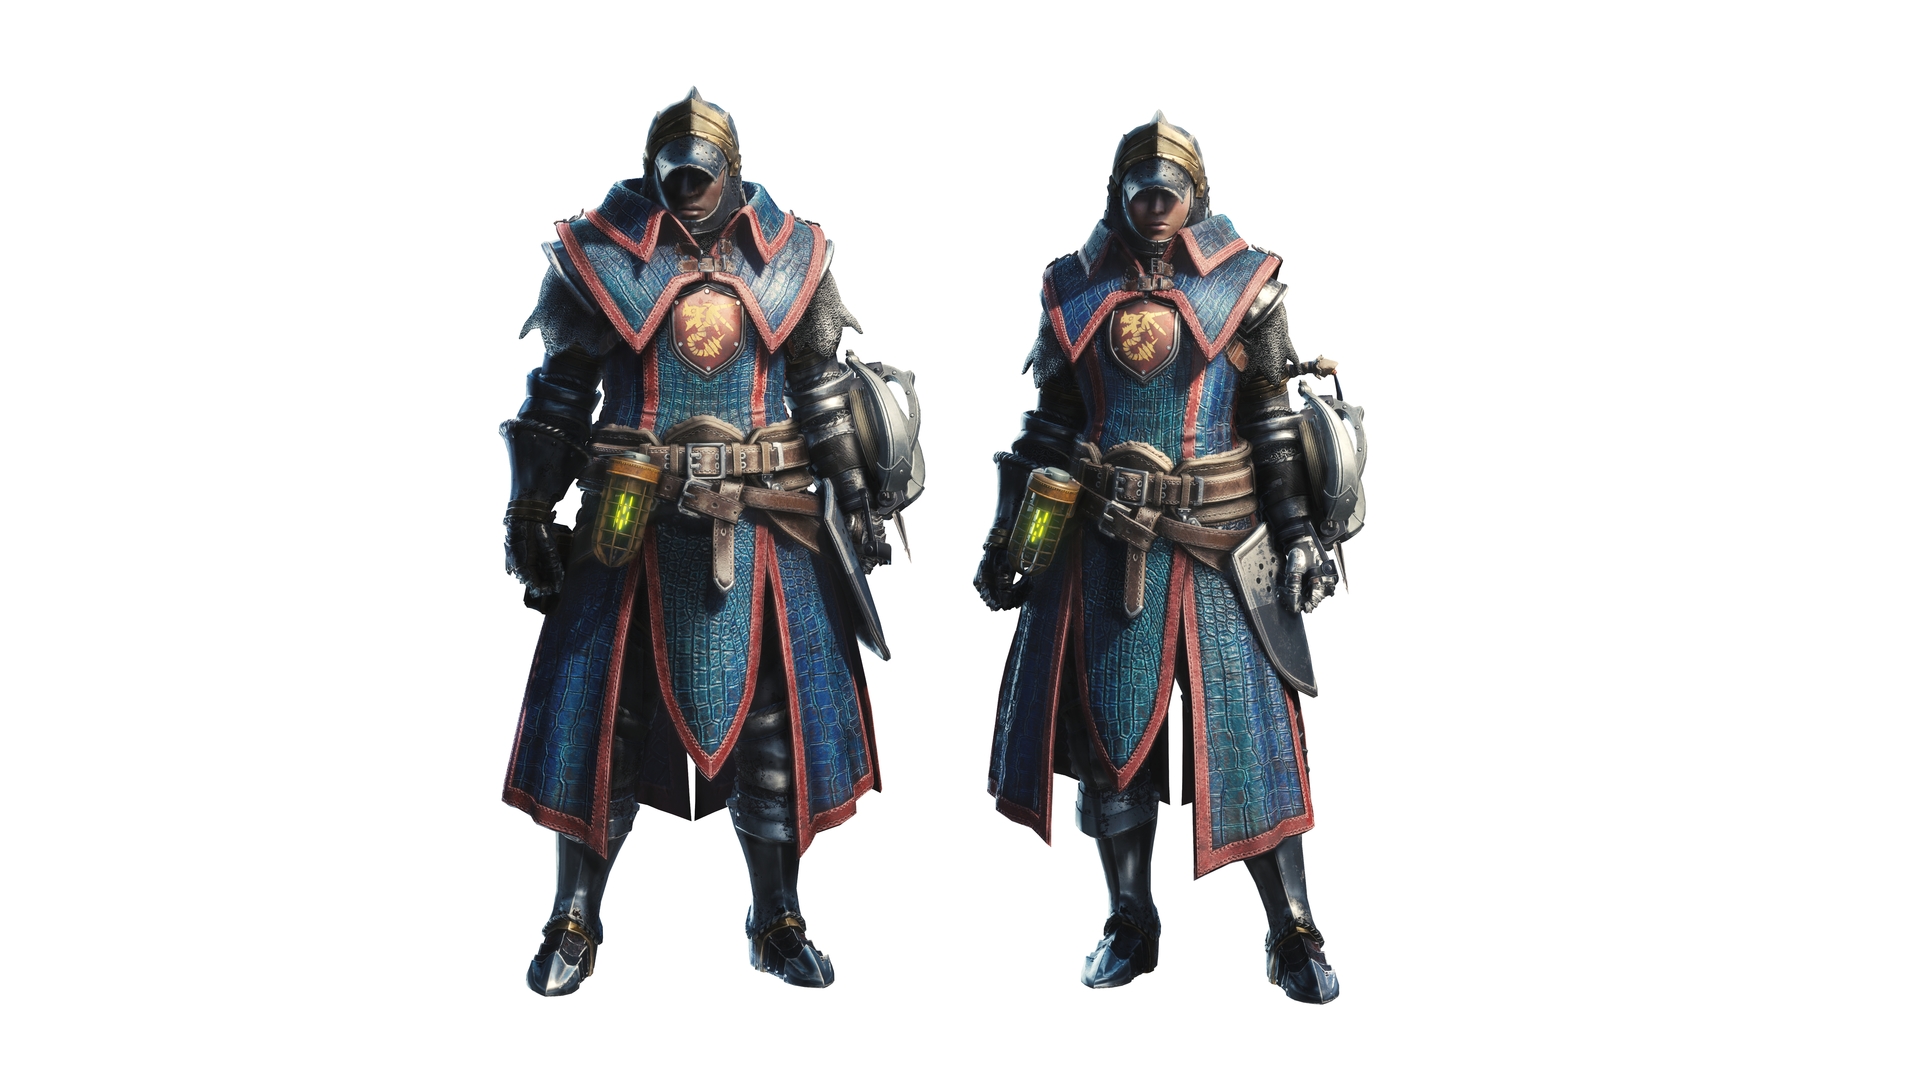 A free Guardian Armor set will be provided to all hunters, in both Monster Hunter...